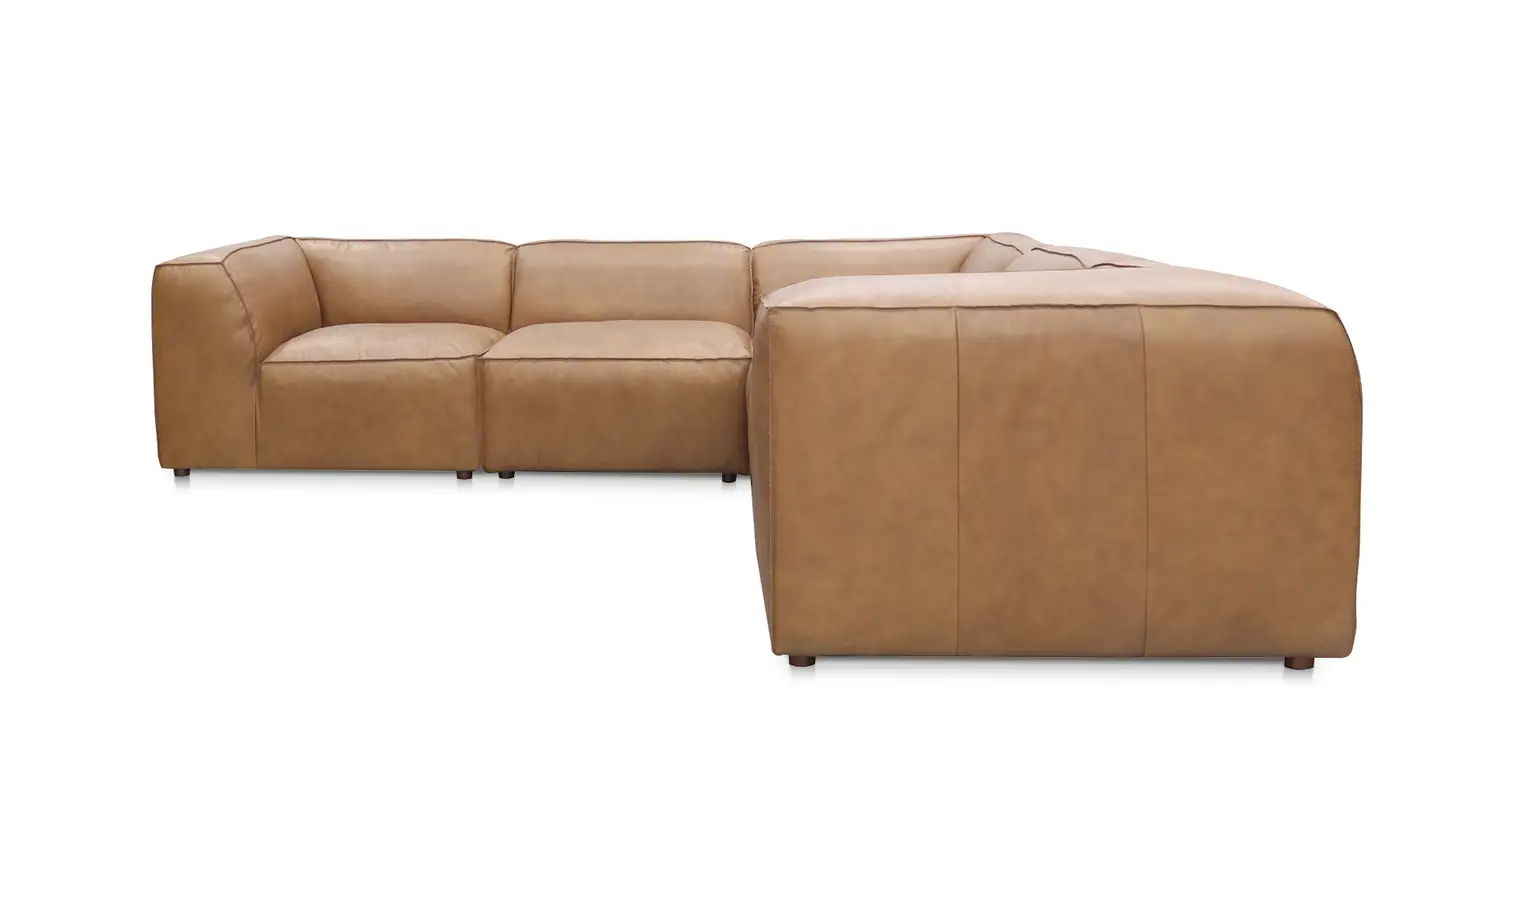 Form Dream Leather Modular Sectional - Tan - Comfy & Stylish